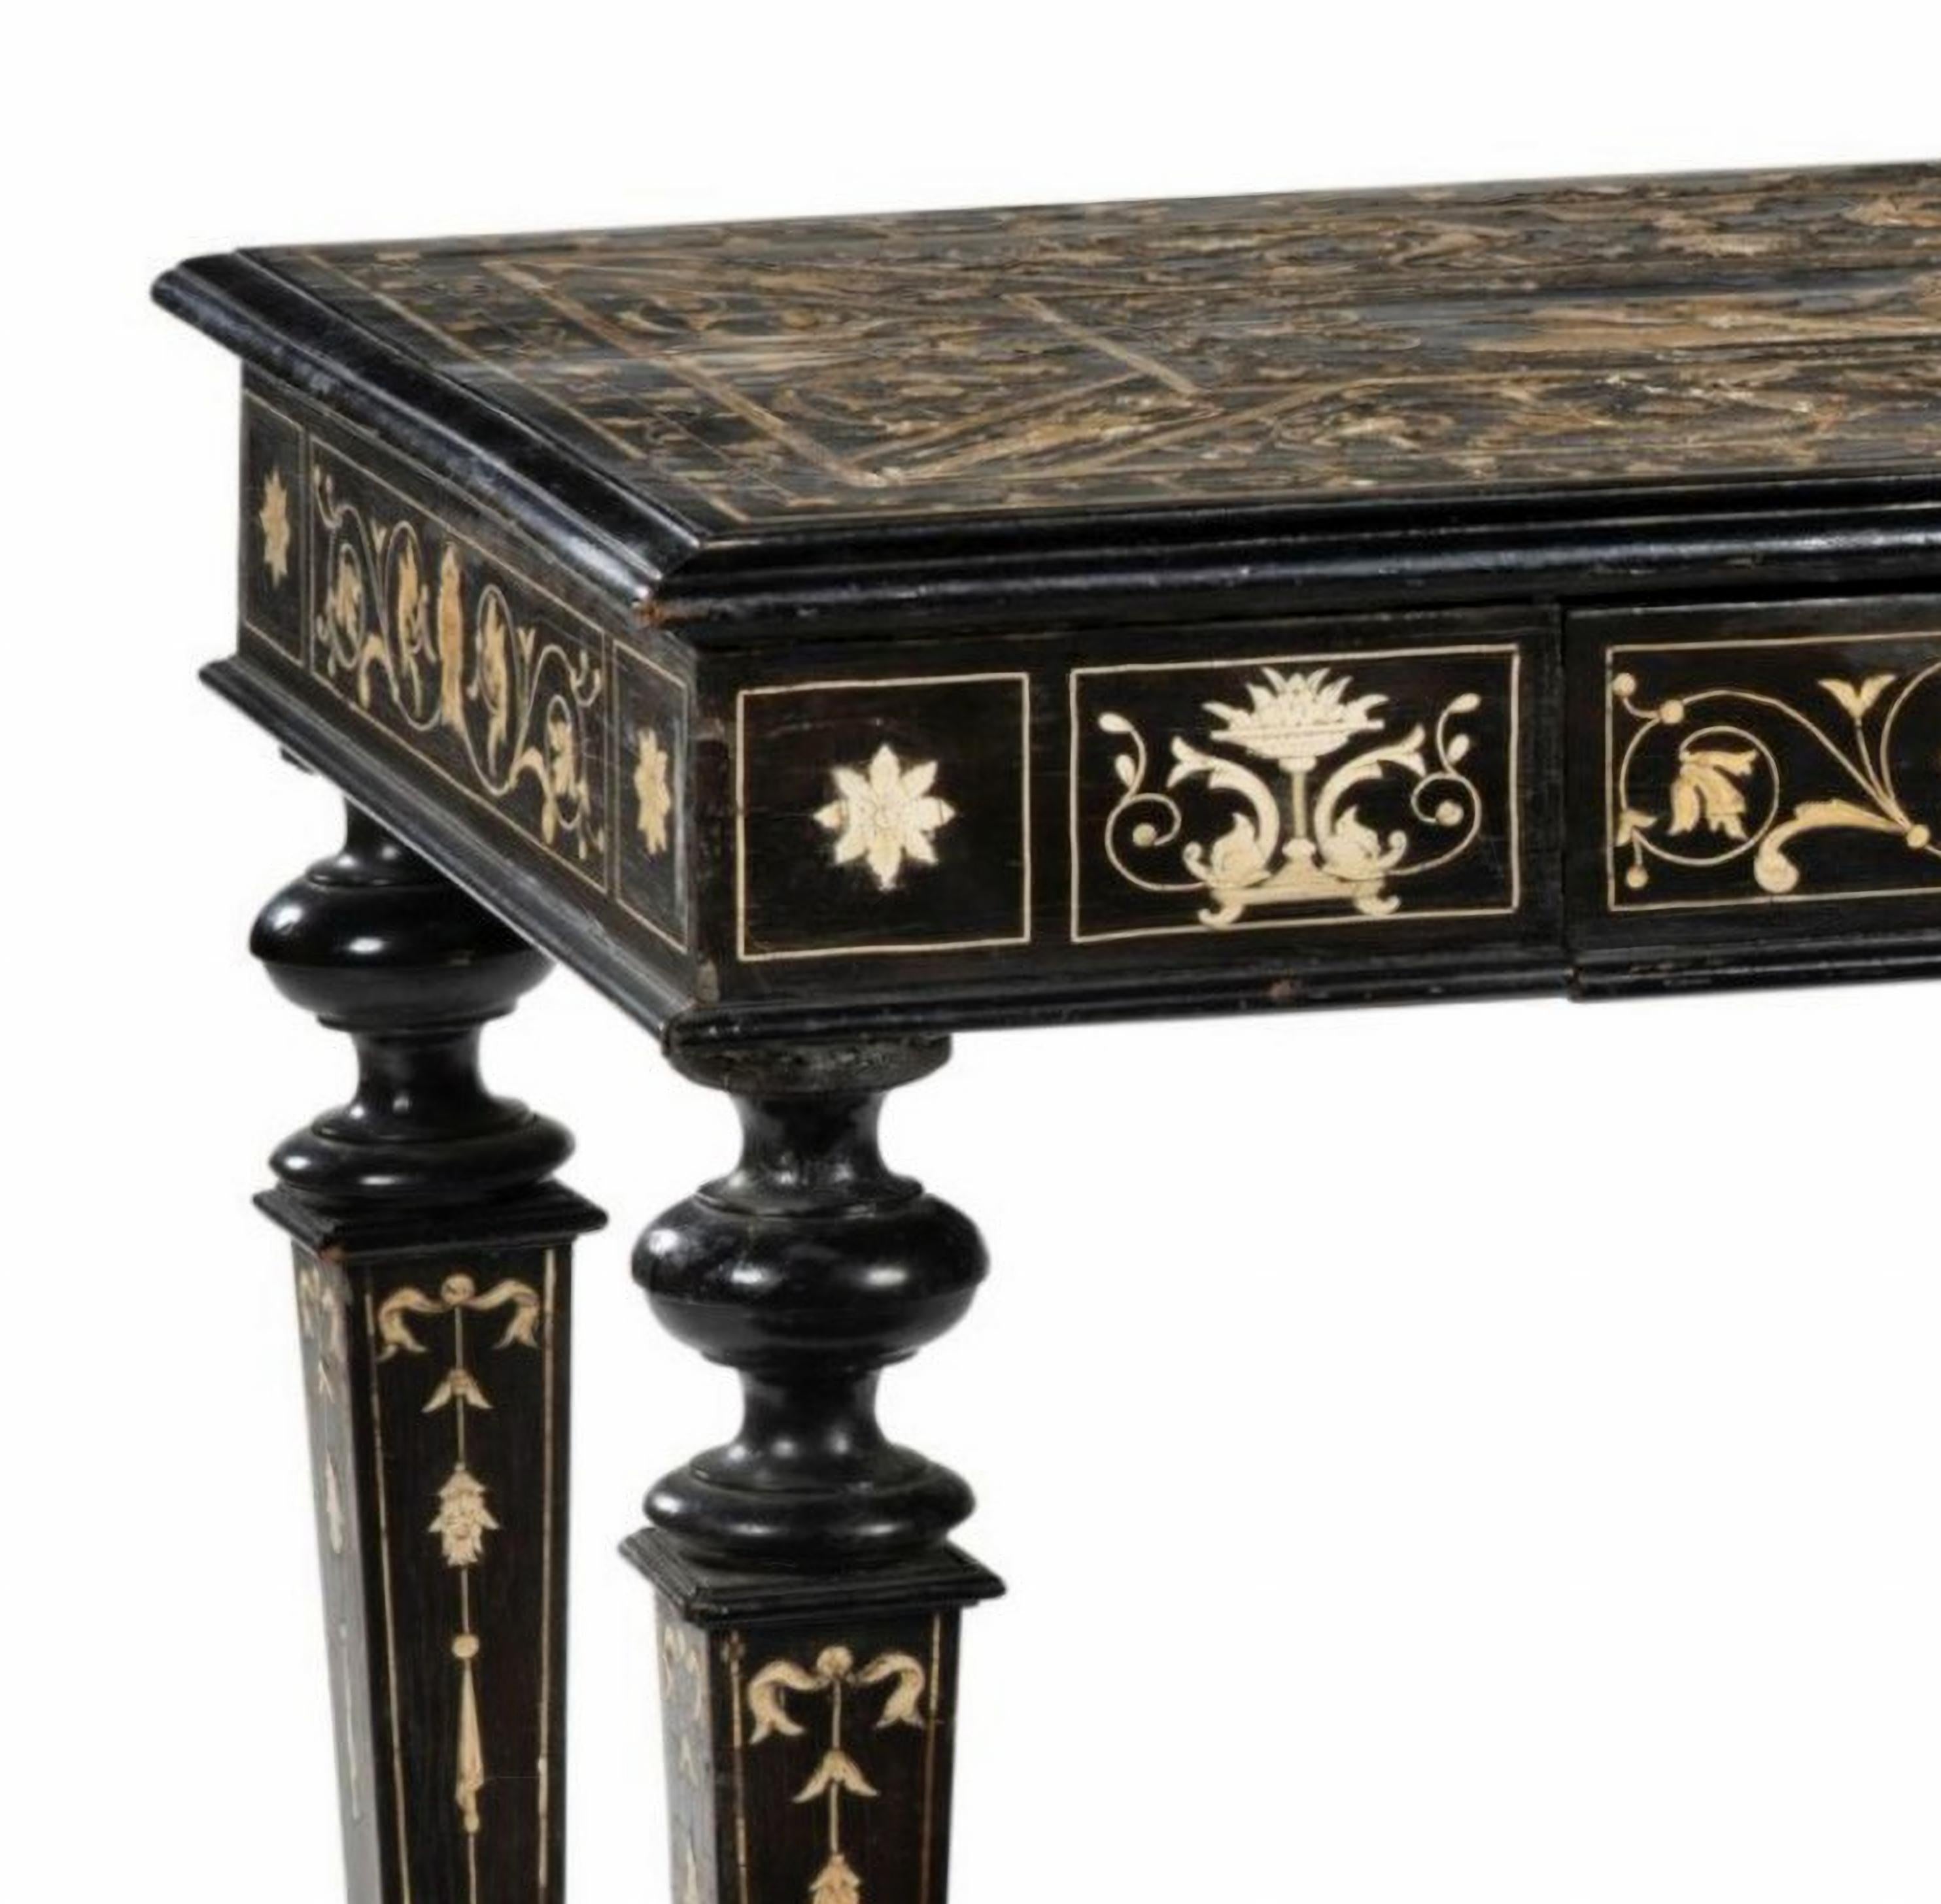 Renaissance Italian Table in Ebonized Wood and Engraved Inlays 19th Century For Sale